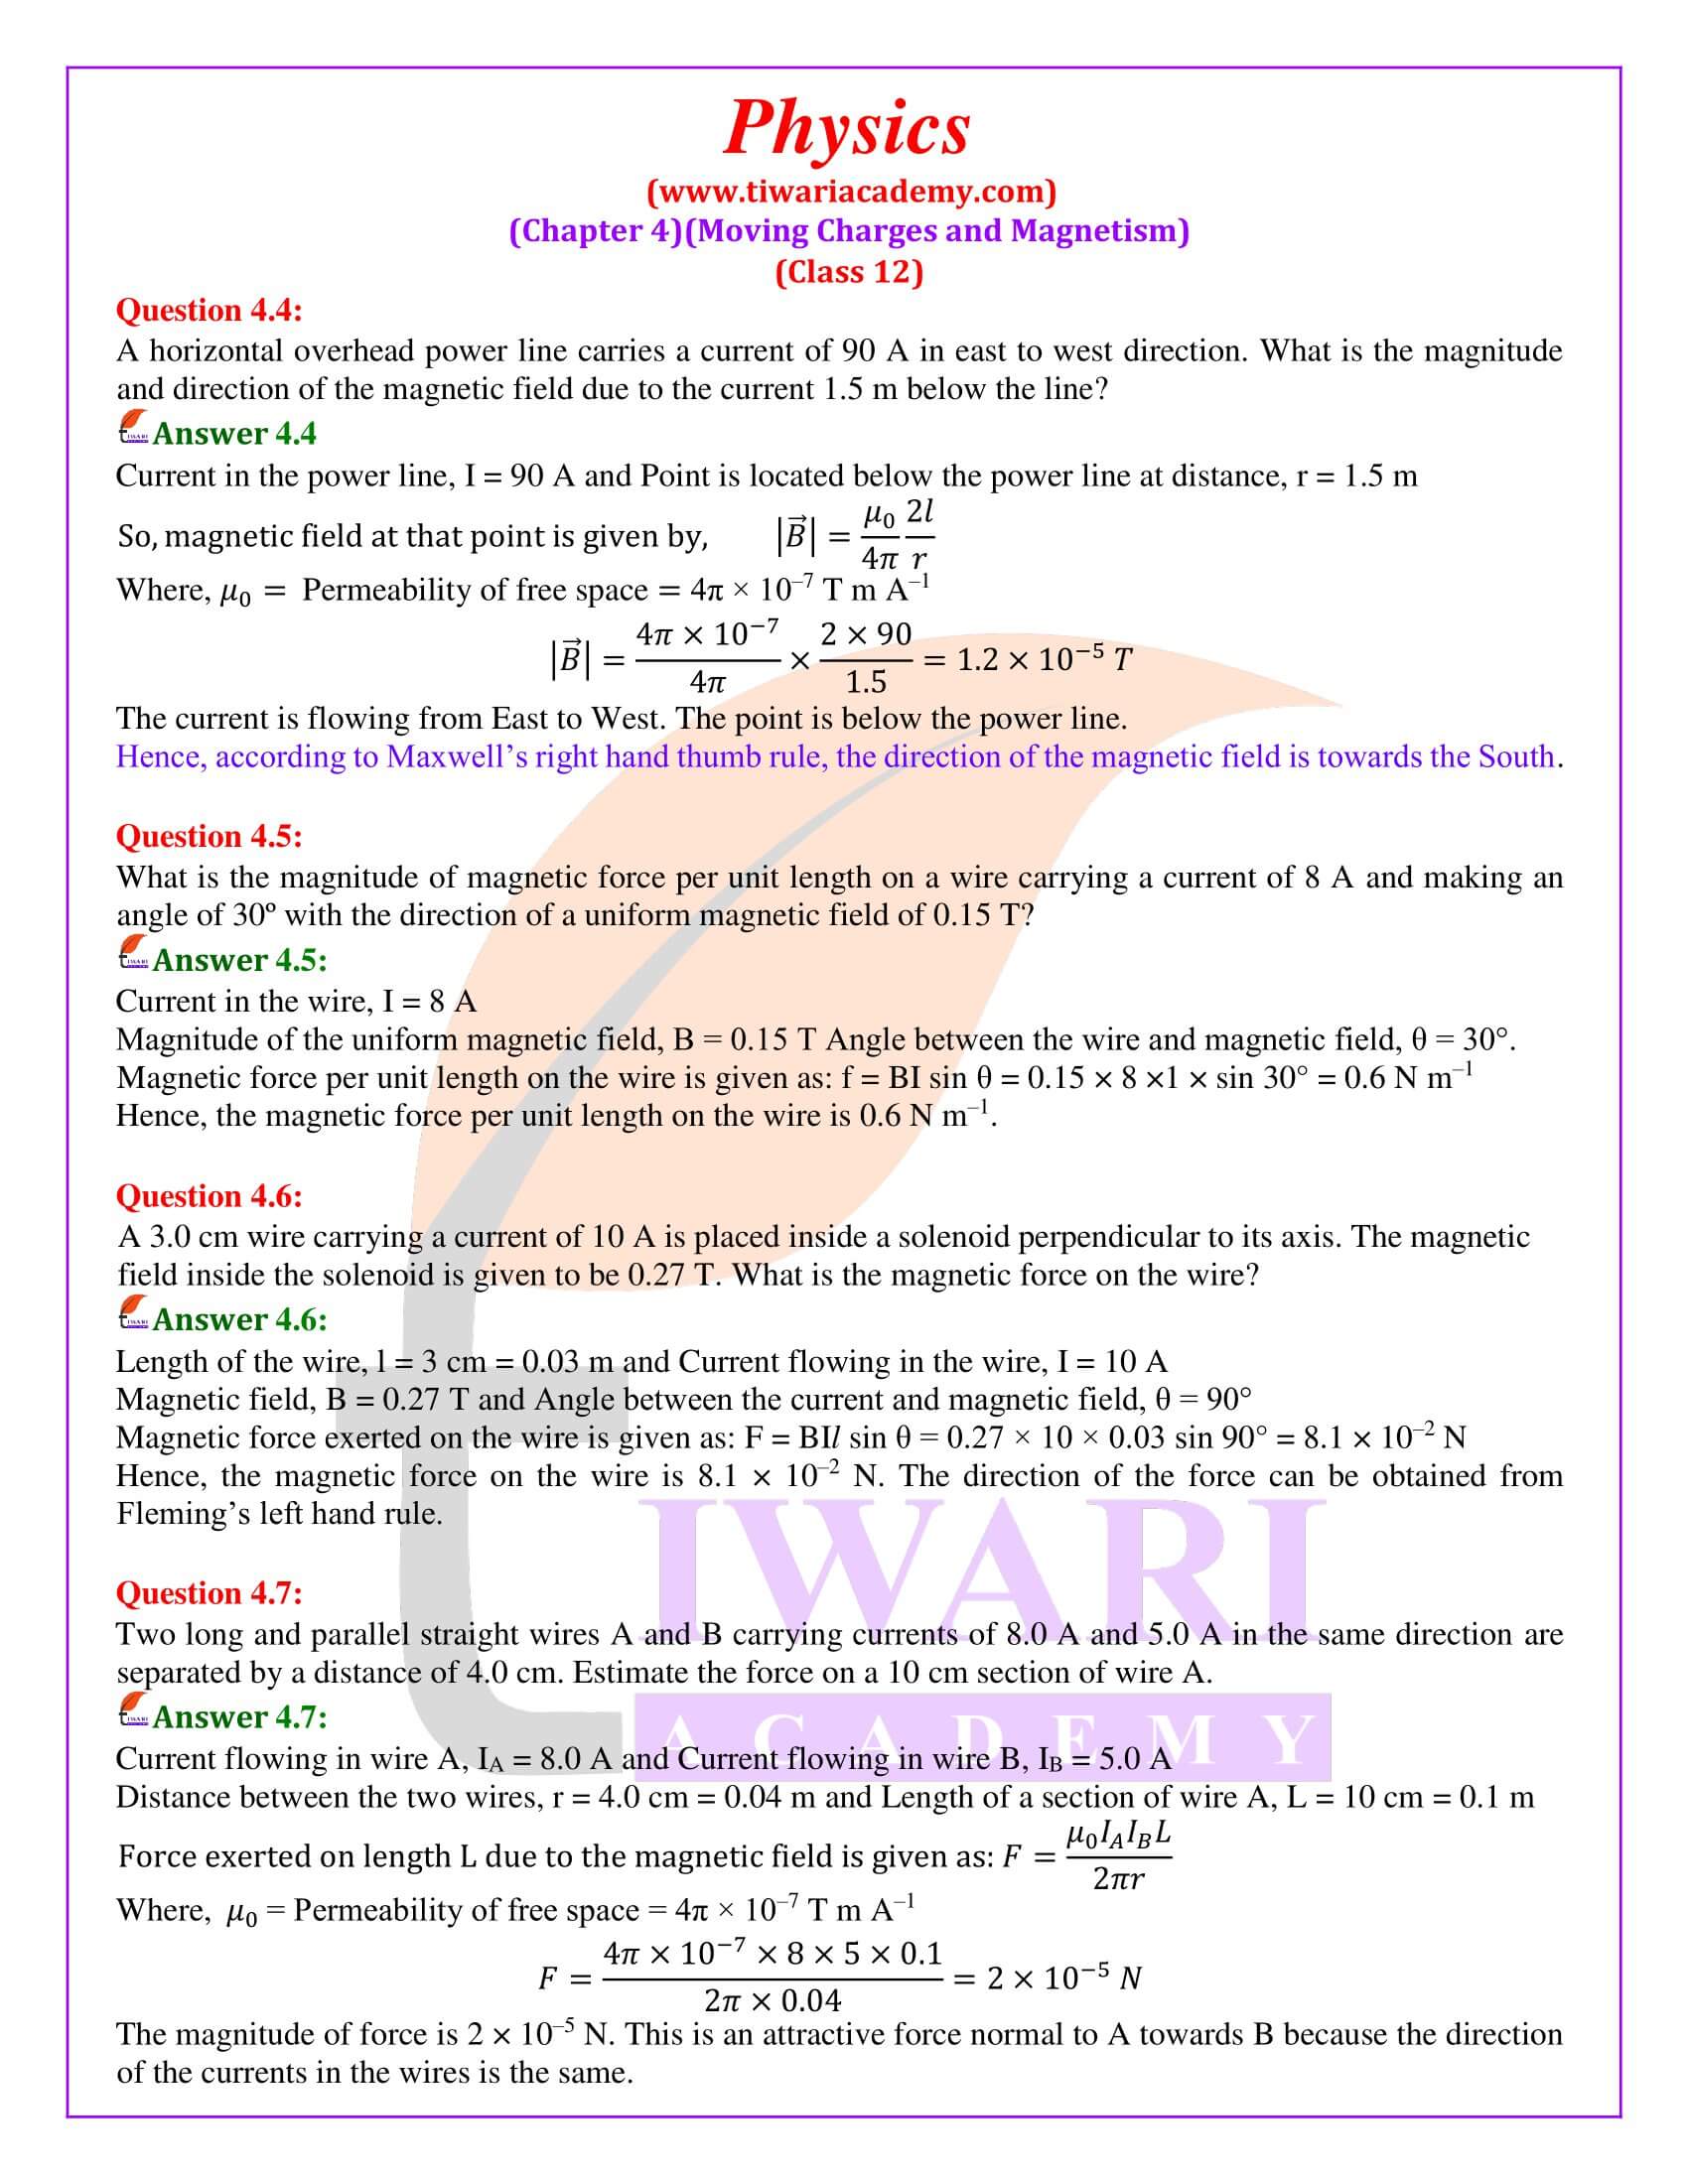 NCERT Solutions for Class 12 Physics Chapter 4